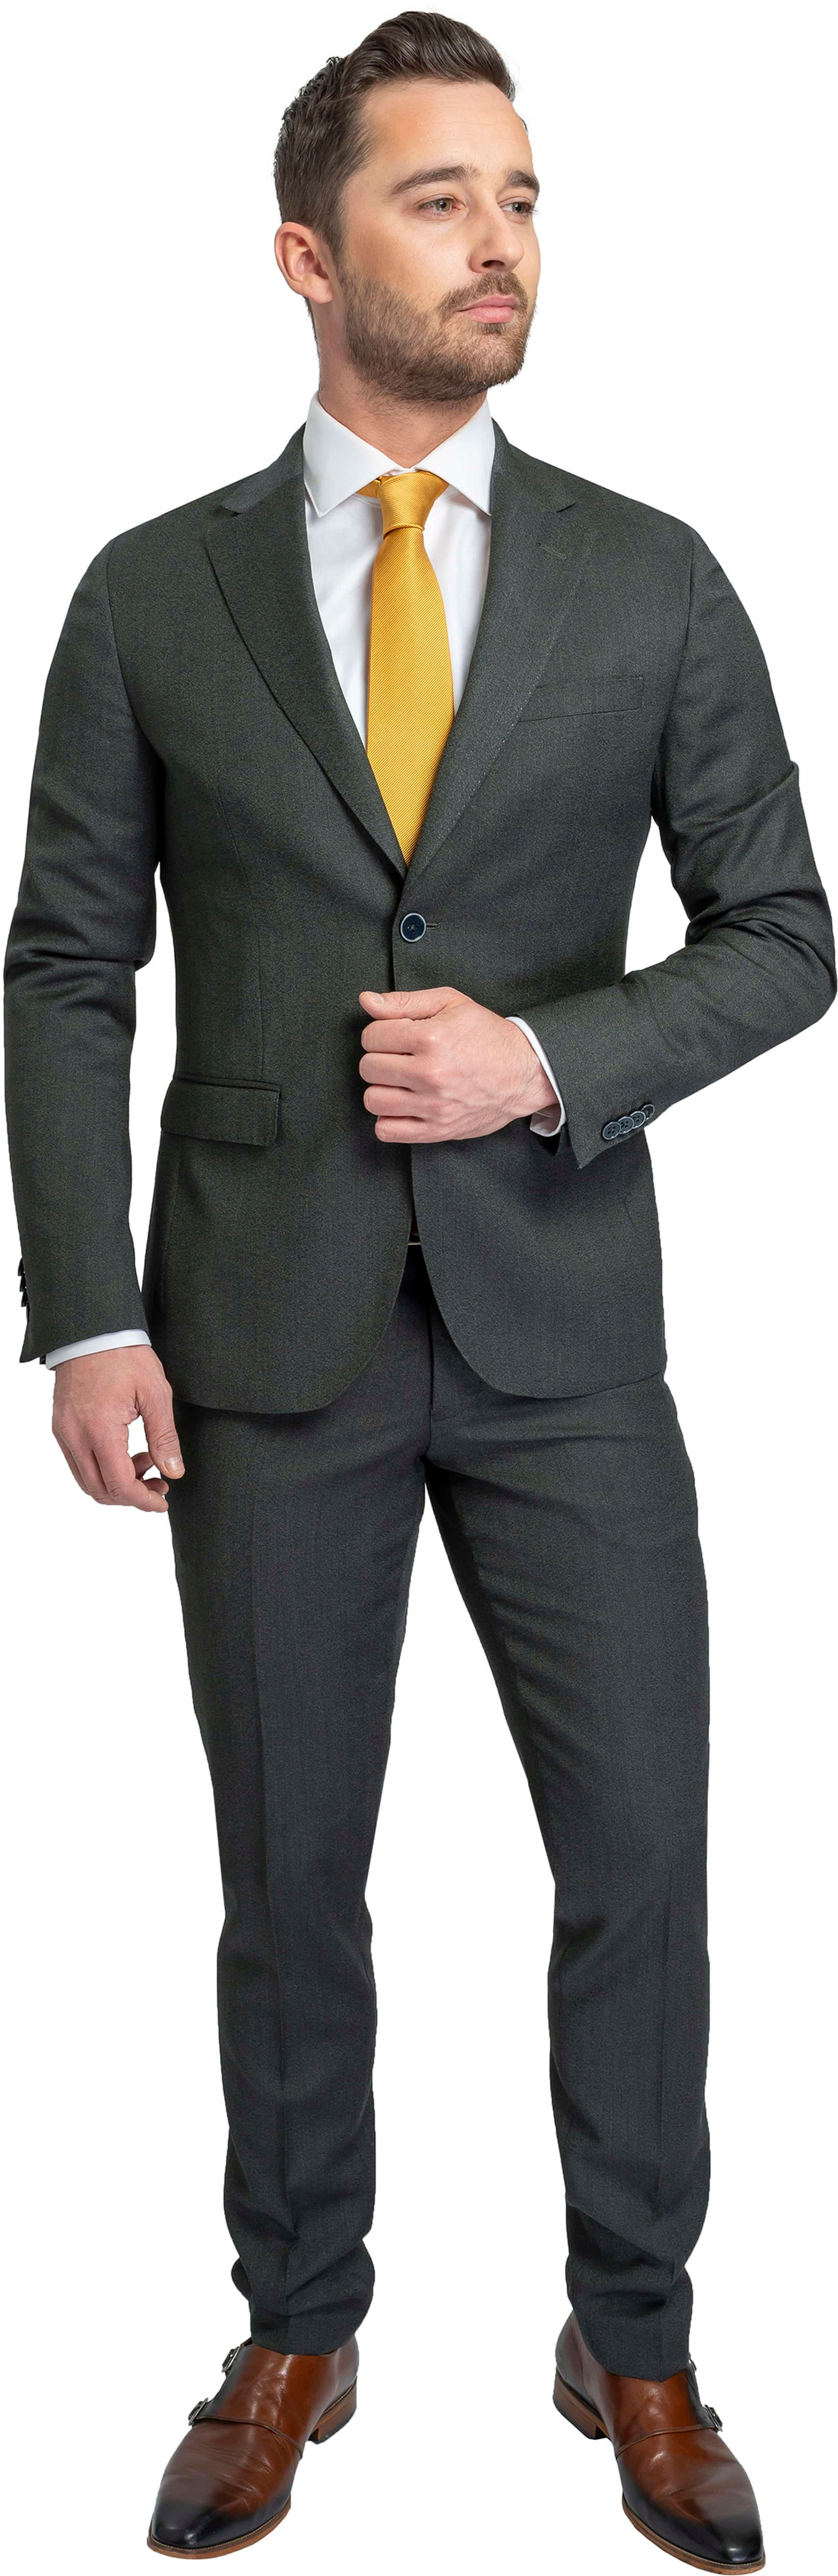 Suitable Suit Strato Dark Green Green size 40-R